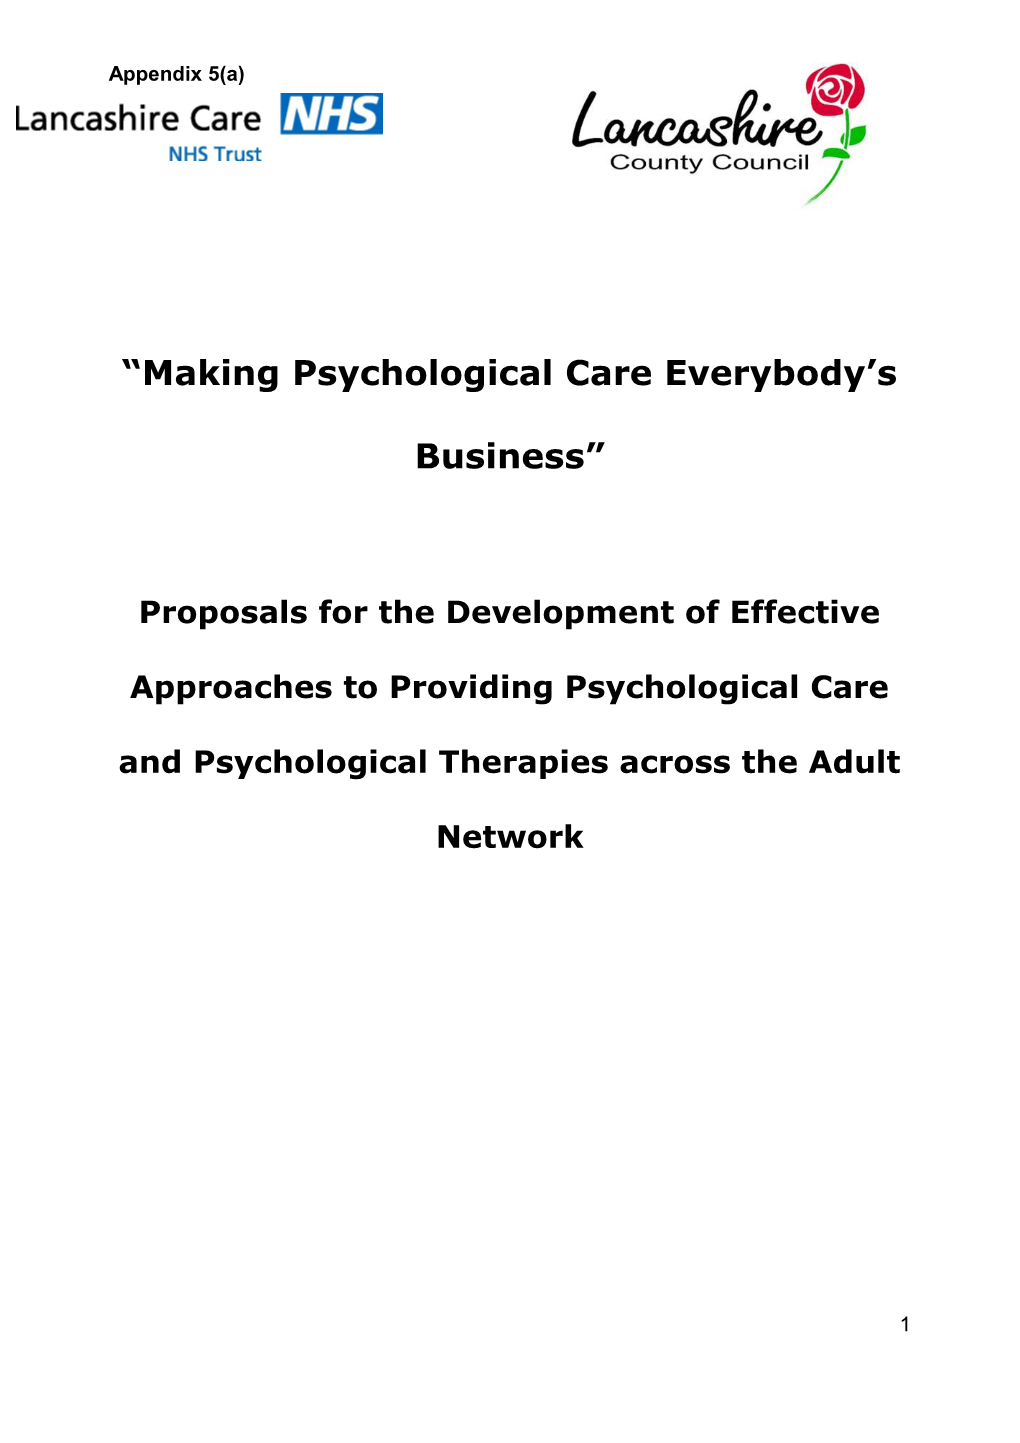 Proposal for the Development of Effective Approaches to Providing Psychological Care And